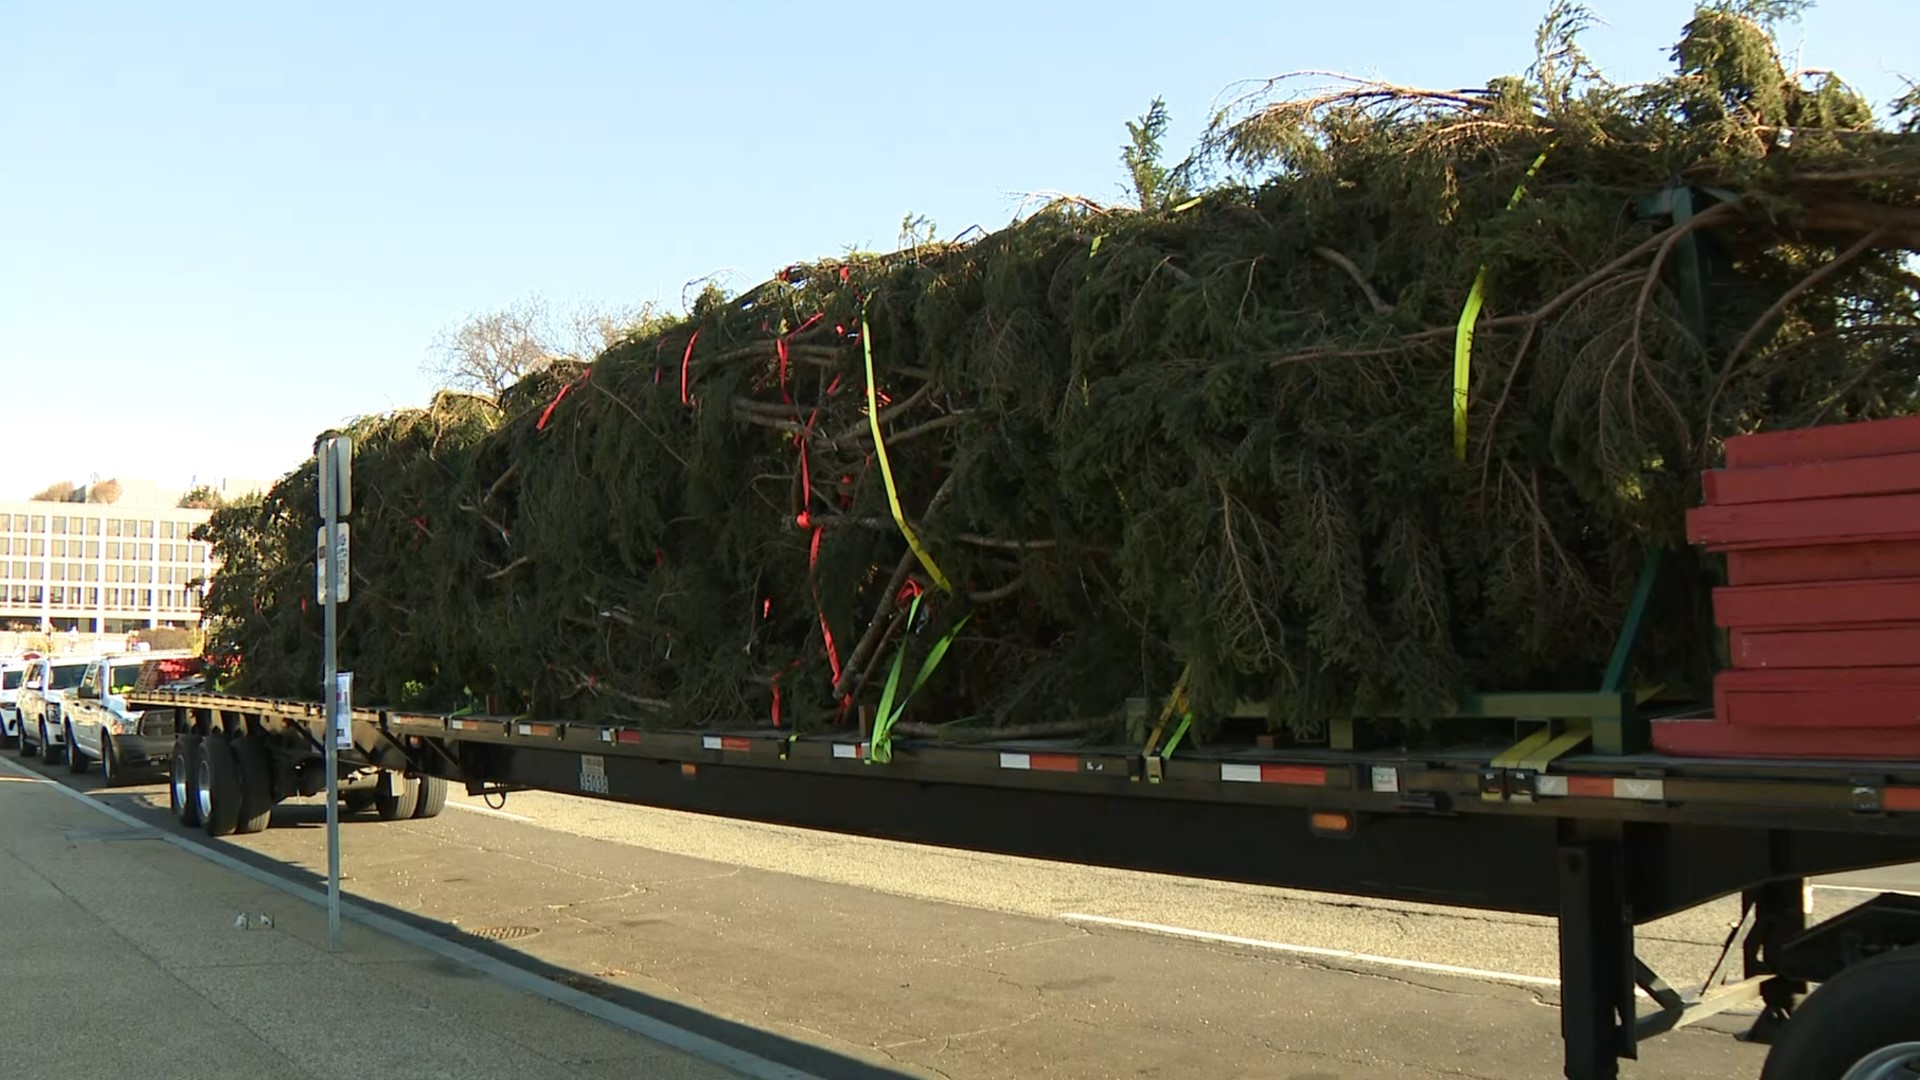 Ruby just arrived by flatbed truck from Pisgah National Forest in North Carolina. She is this year's U-S Capitol Christmas Tree.